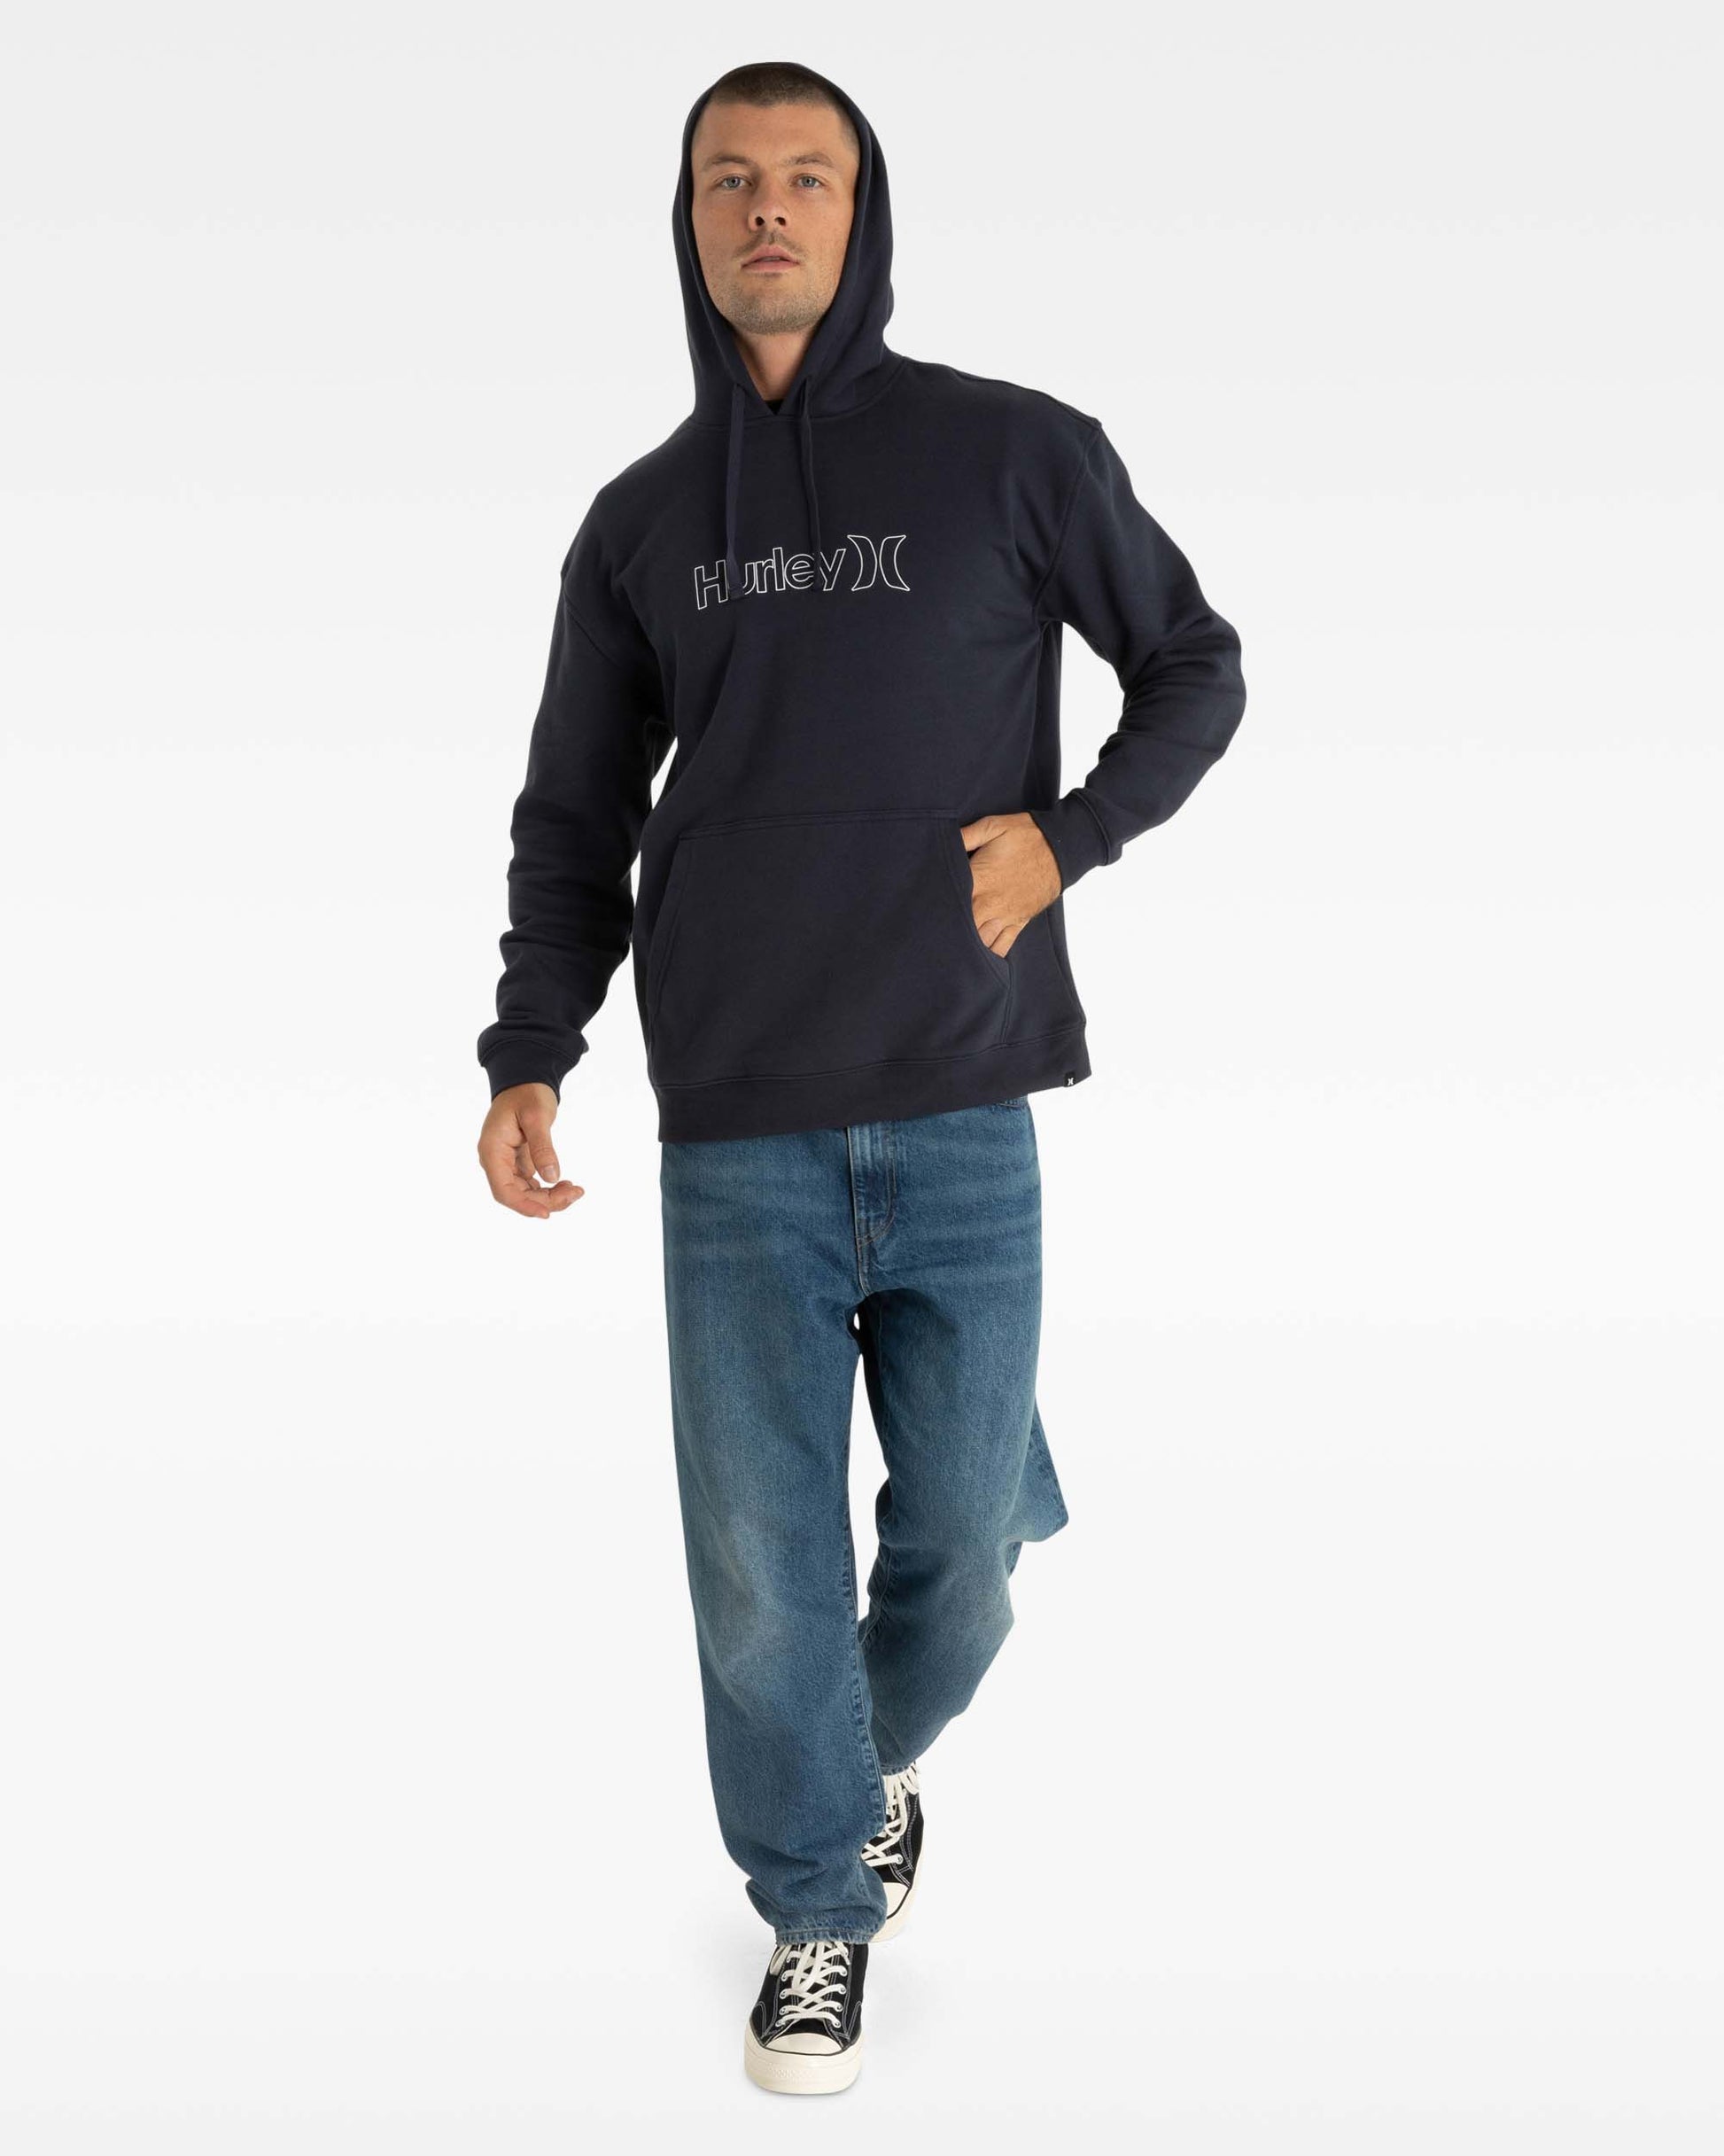 Hurley Outline Pullover Men's Fleece in after midnight colour